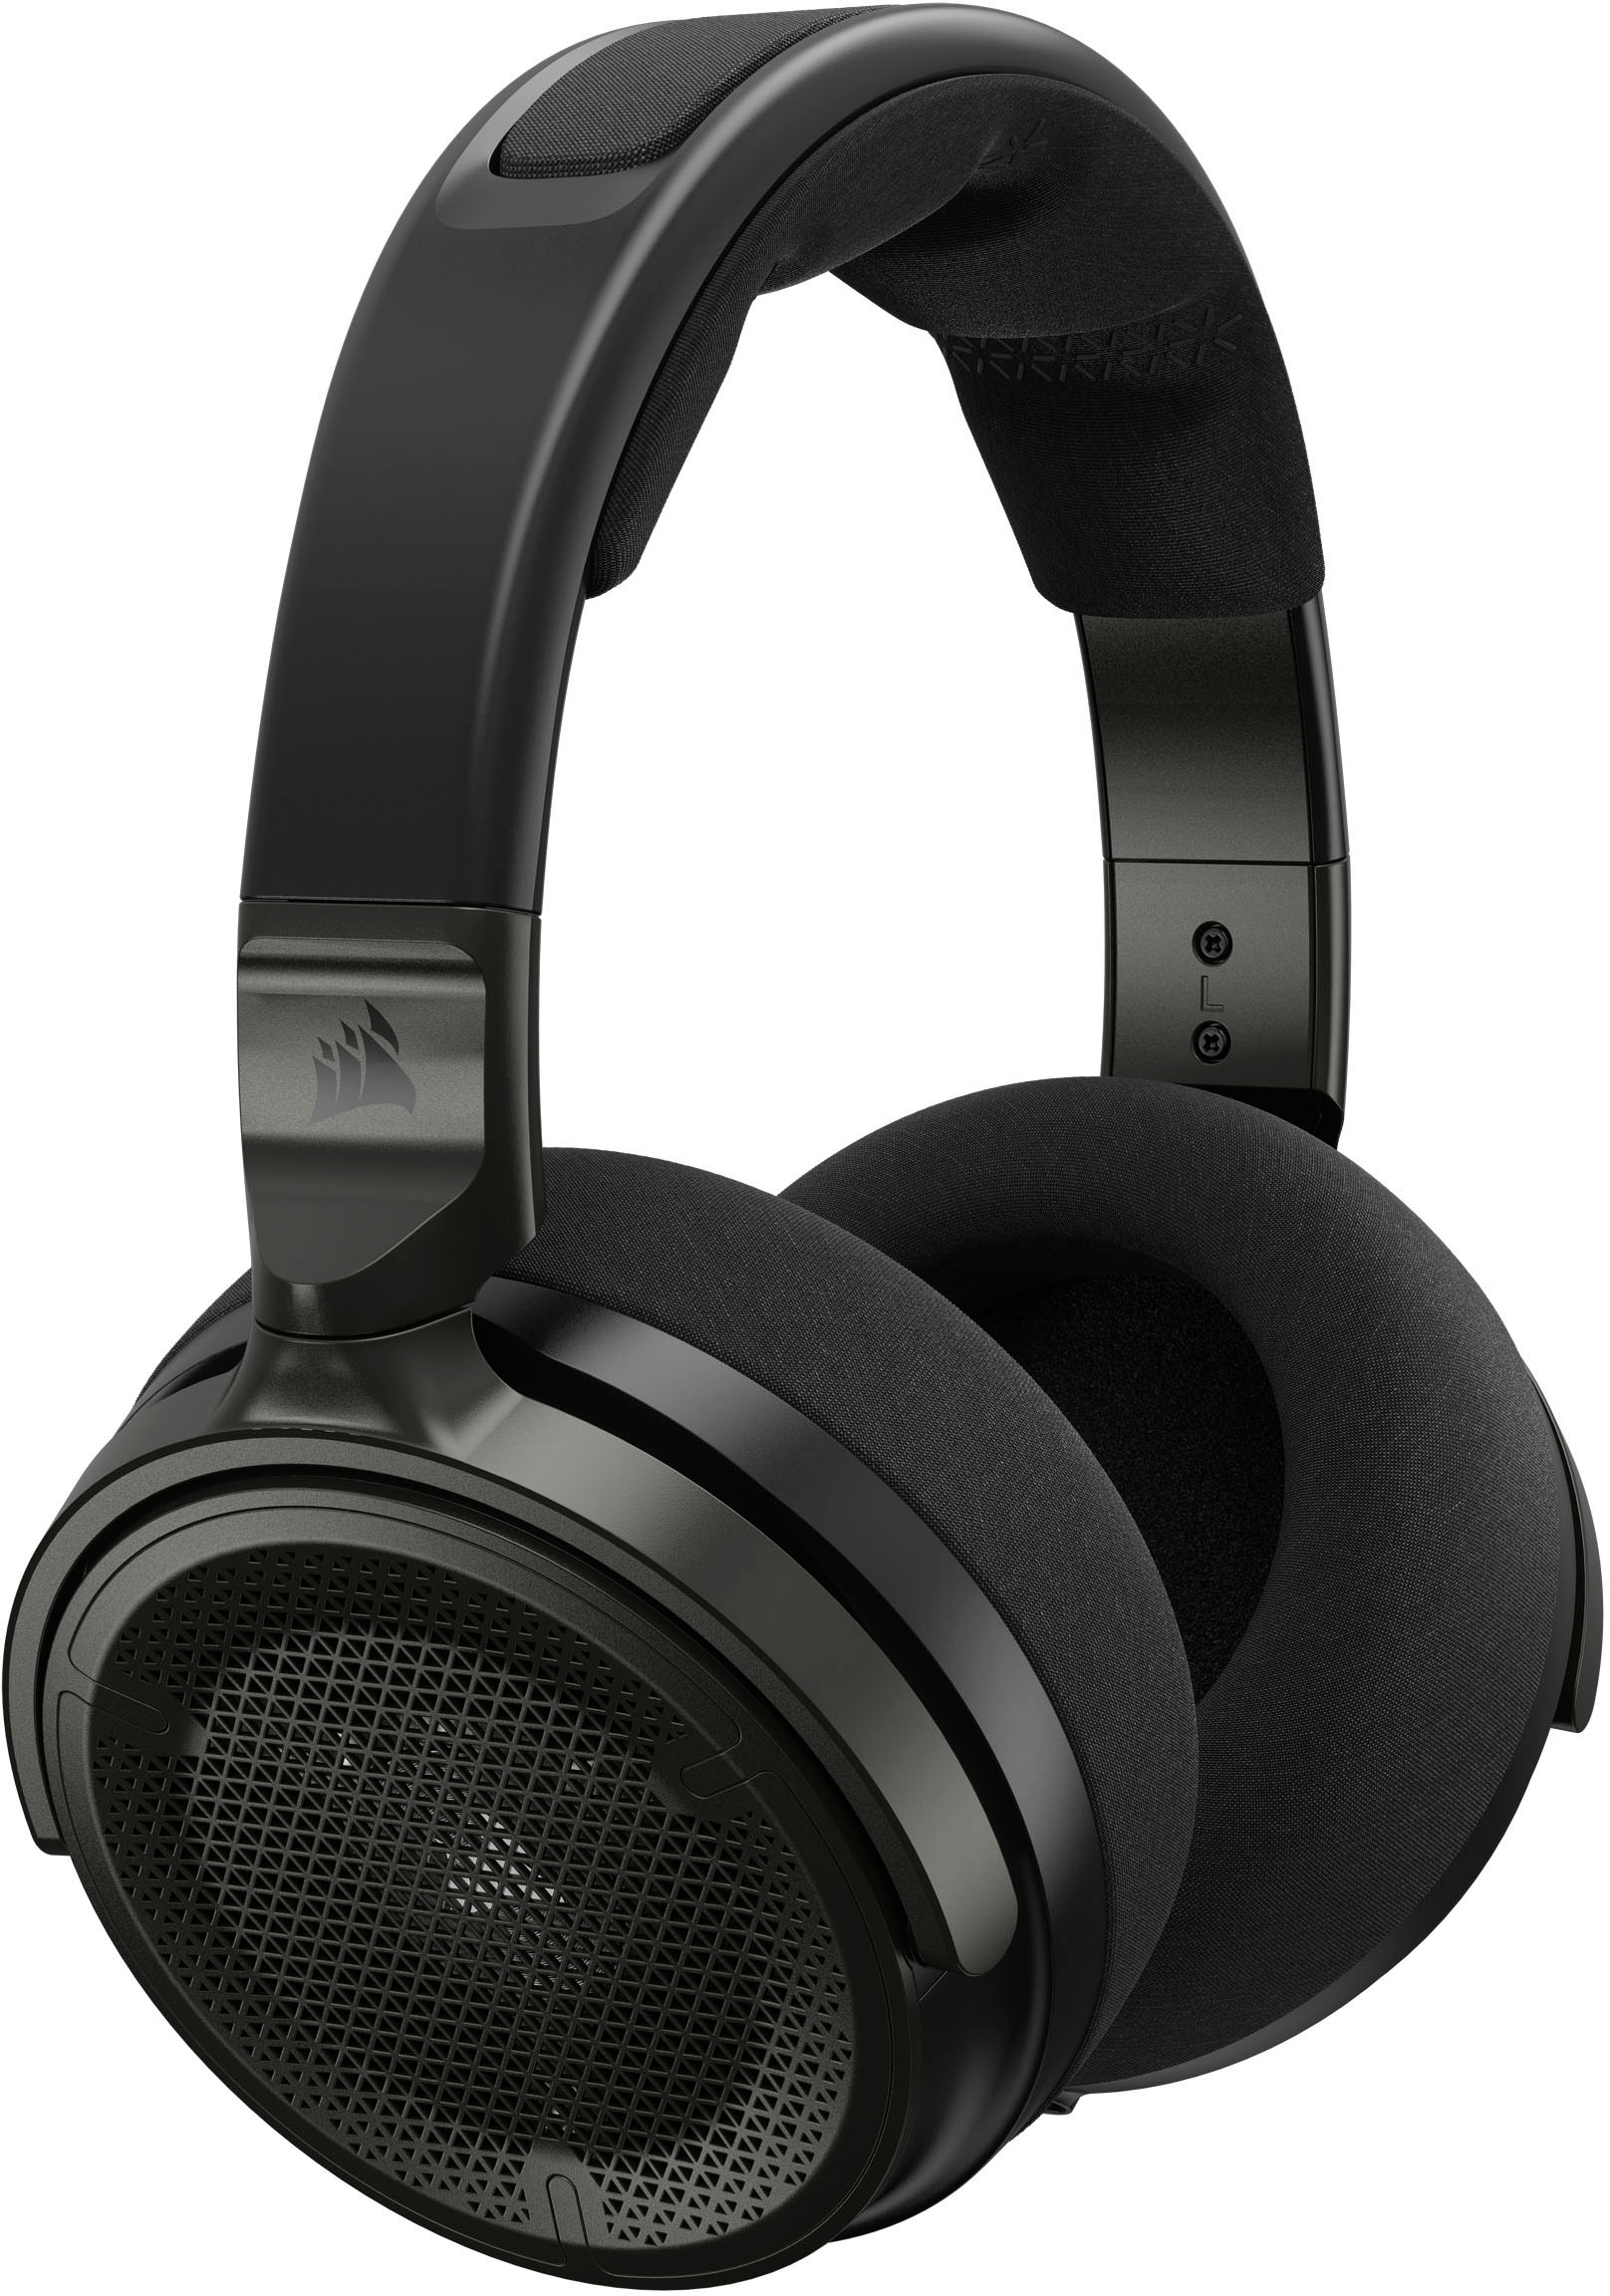 Corsair Virtuoso Pro review: A killer headset for gamers and streamers